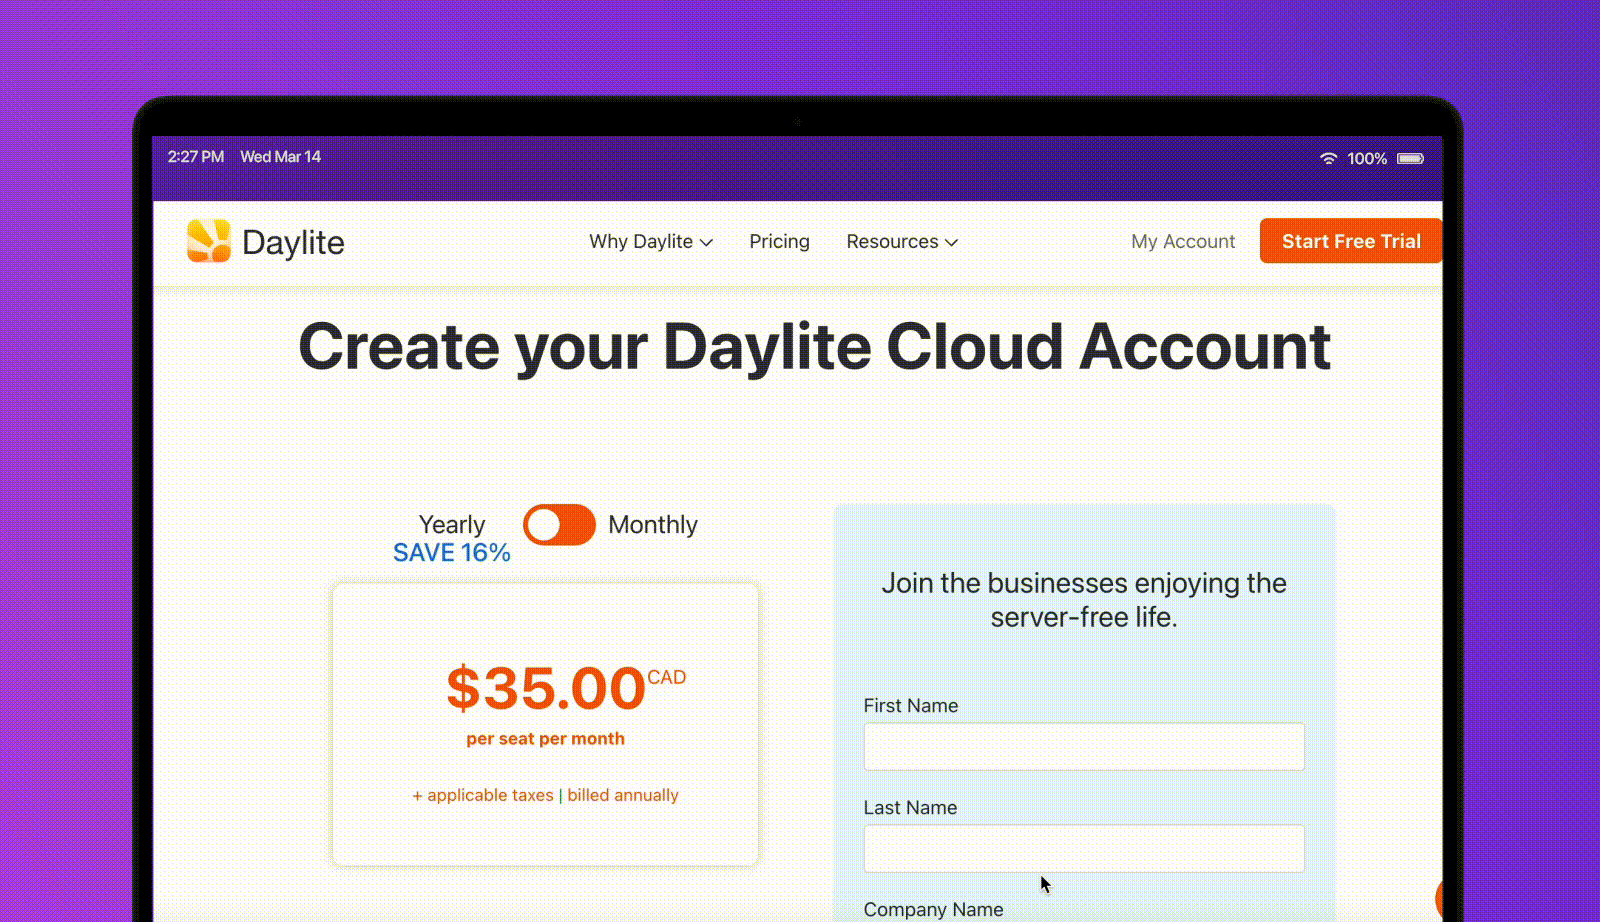 Gif shows a detailed step-by-step of how to migrate to Daylite cloud.